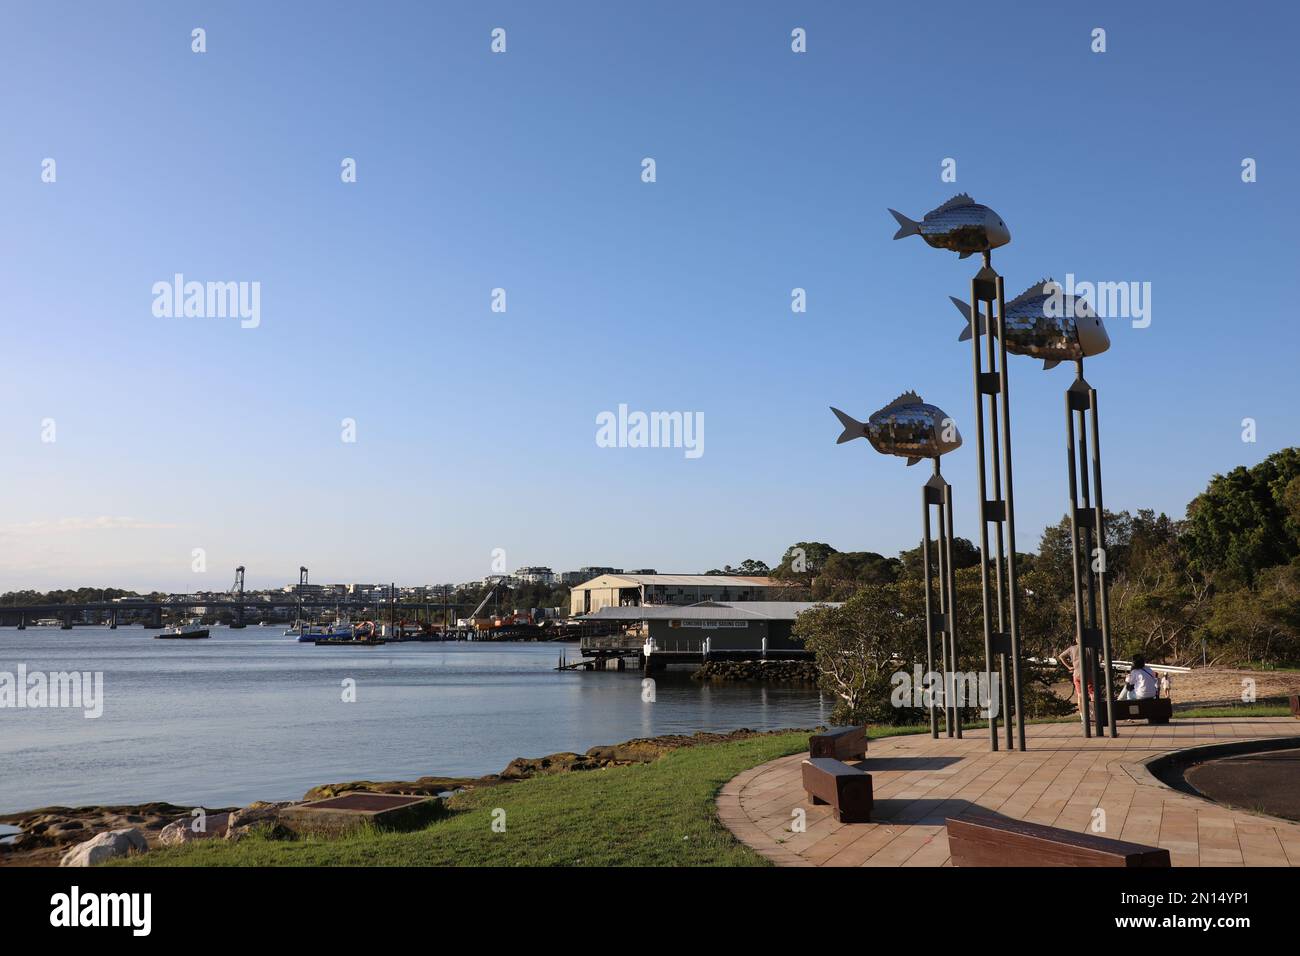 Snapper fish wind sculptures, installed in December 2011. These beautiful works located in Kissing Point Park represent the traditional totem of the a Stock Photo